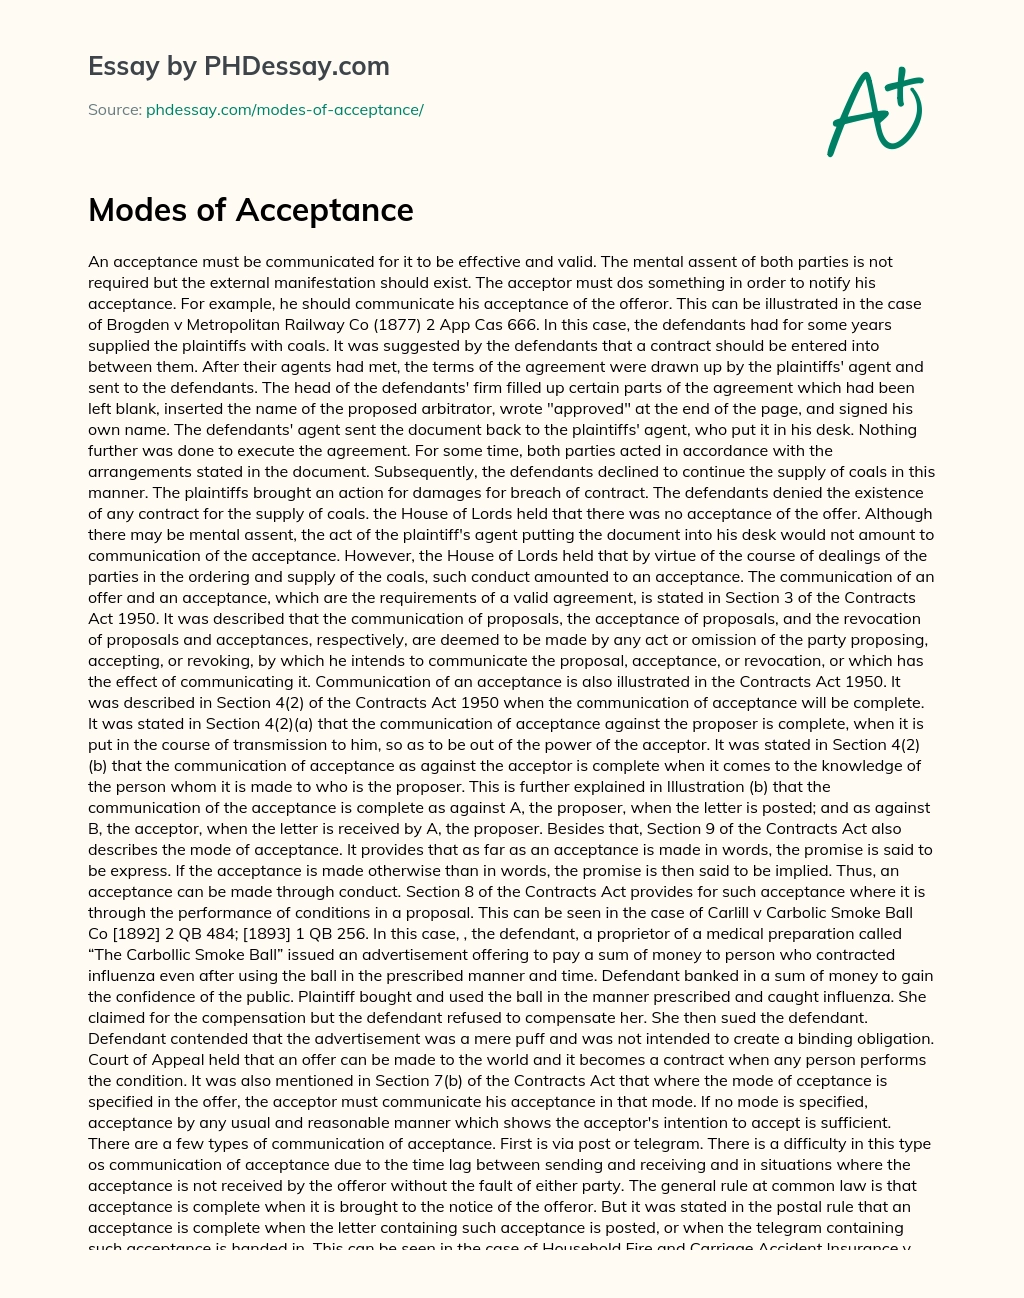 Modes of Acceptance essay